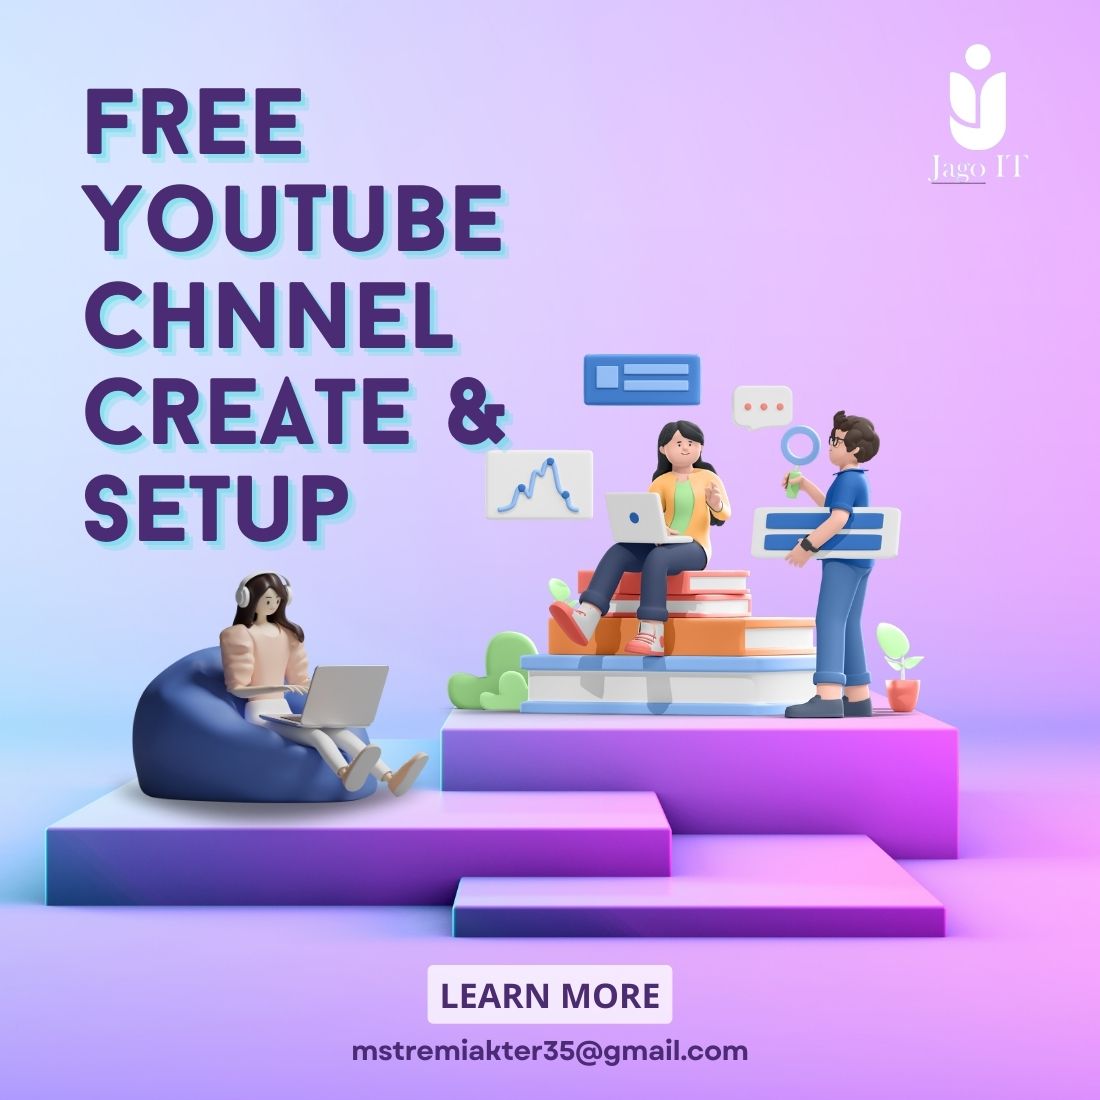 🎉Free Youtube Channel create & setup 🎉
Contact me 
📞01944748604
📩 mstremiakter35@gmail.com
#youtube #youtuber #youtubers #youtubechannel #youtubevideo #youtubegaming #youtubeuse #youtubeitalia #youtubeblogger #youtubevideos #youtubegamer #youtubelife #YouTubeGamers